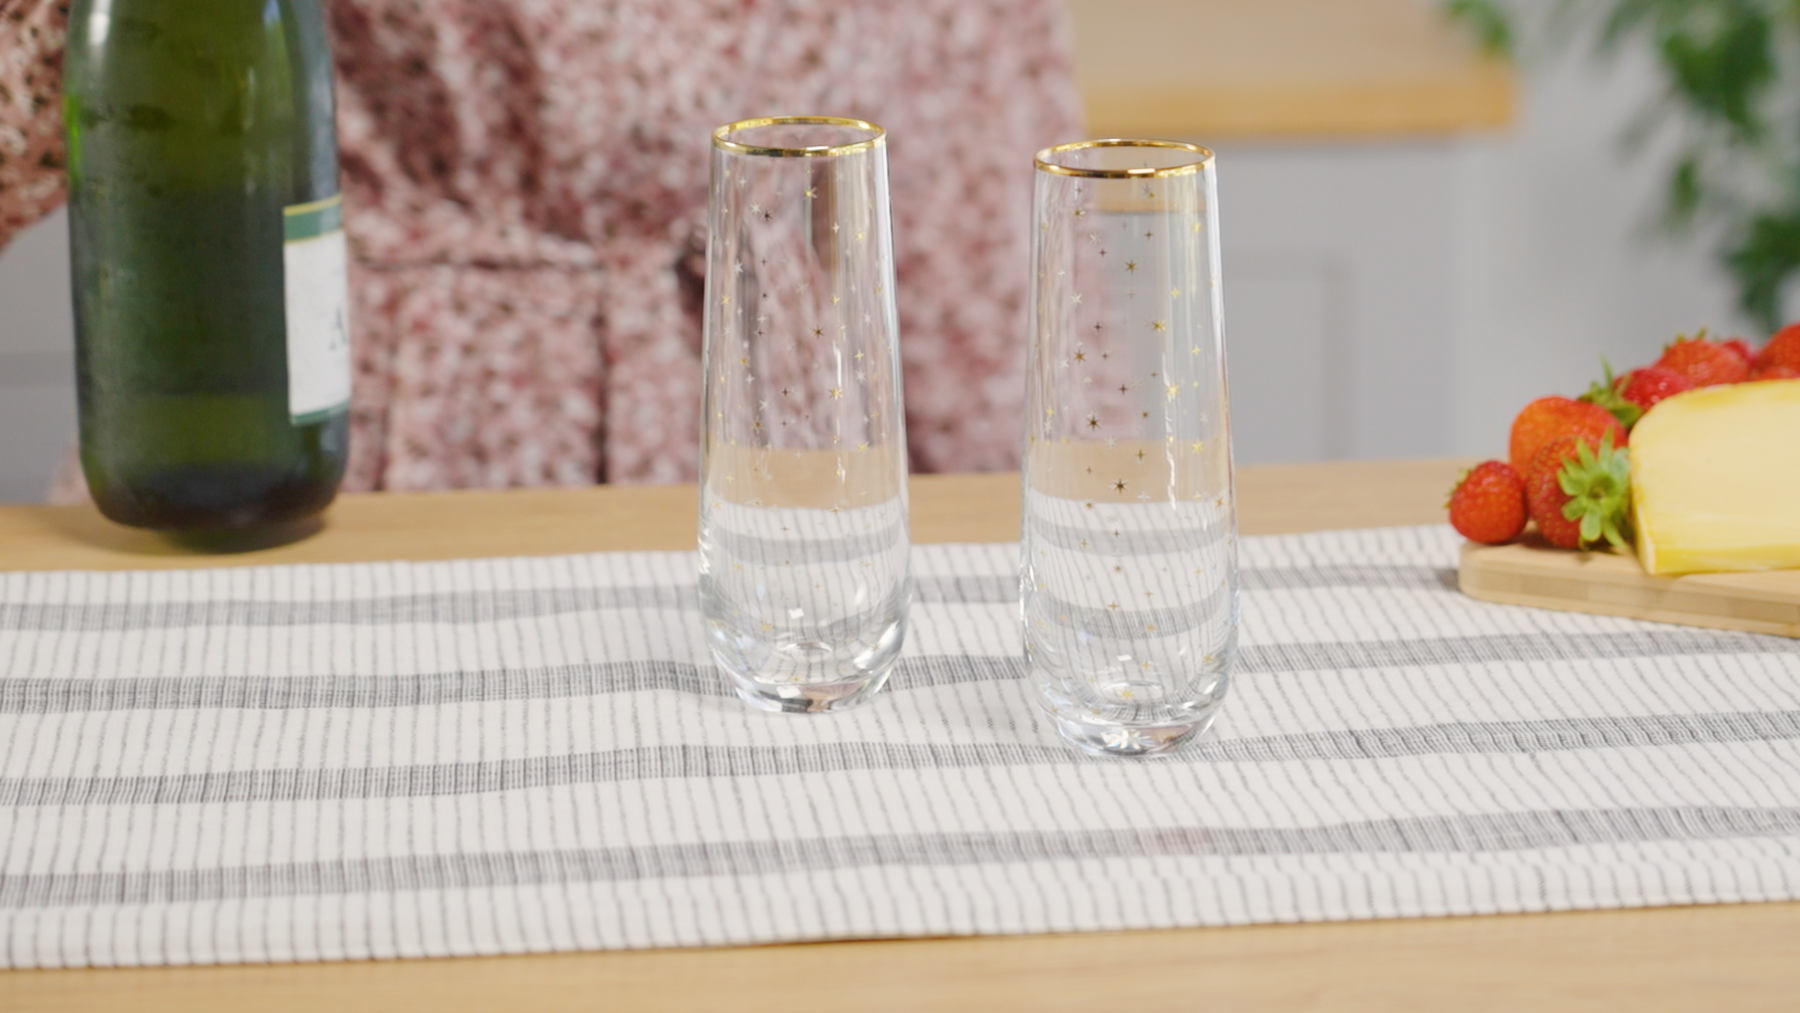 Starlight Stemless Champagne Flute Set by Twine®Starlight St, Pack